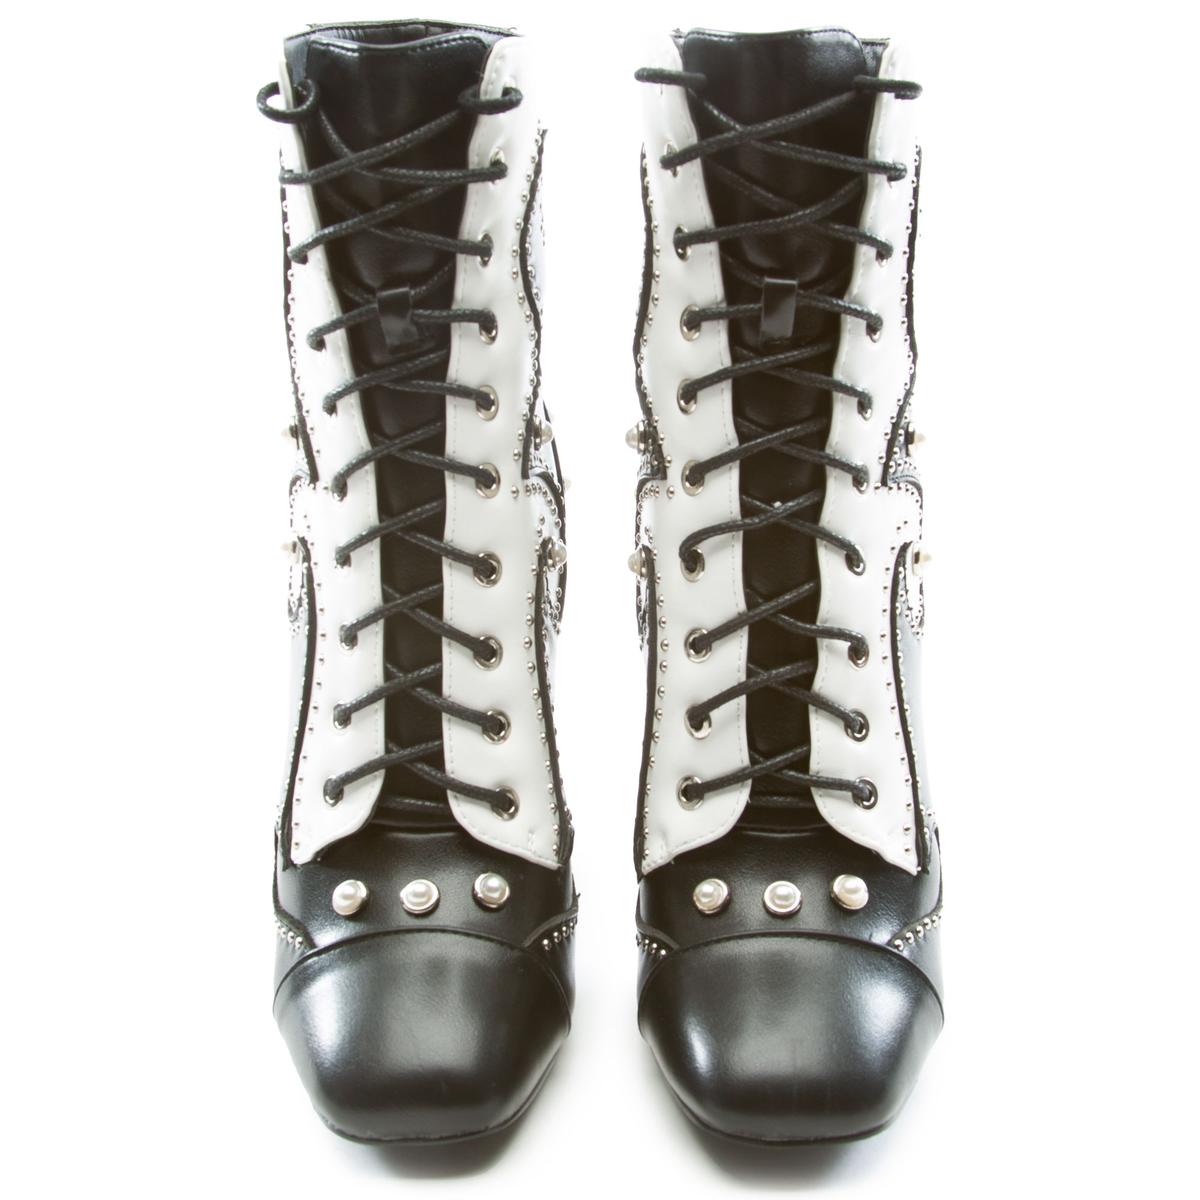 Division Lace Up Heel Bootie